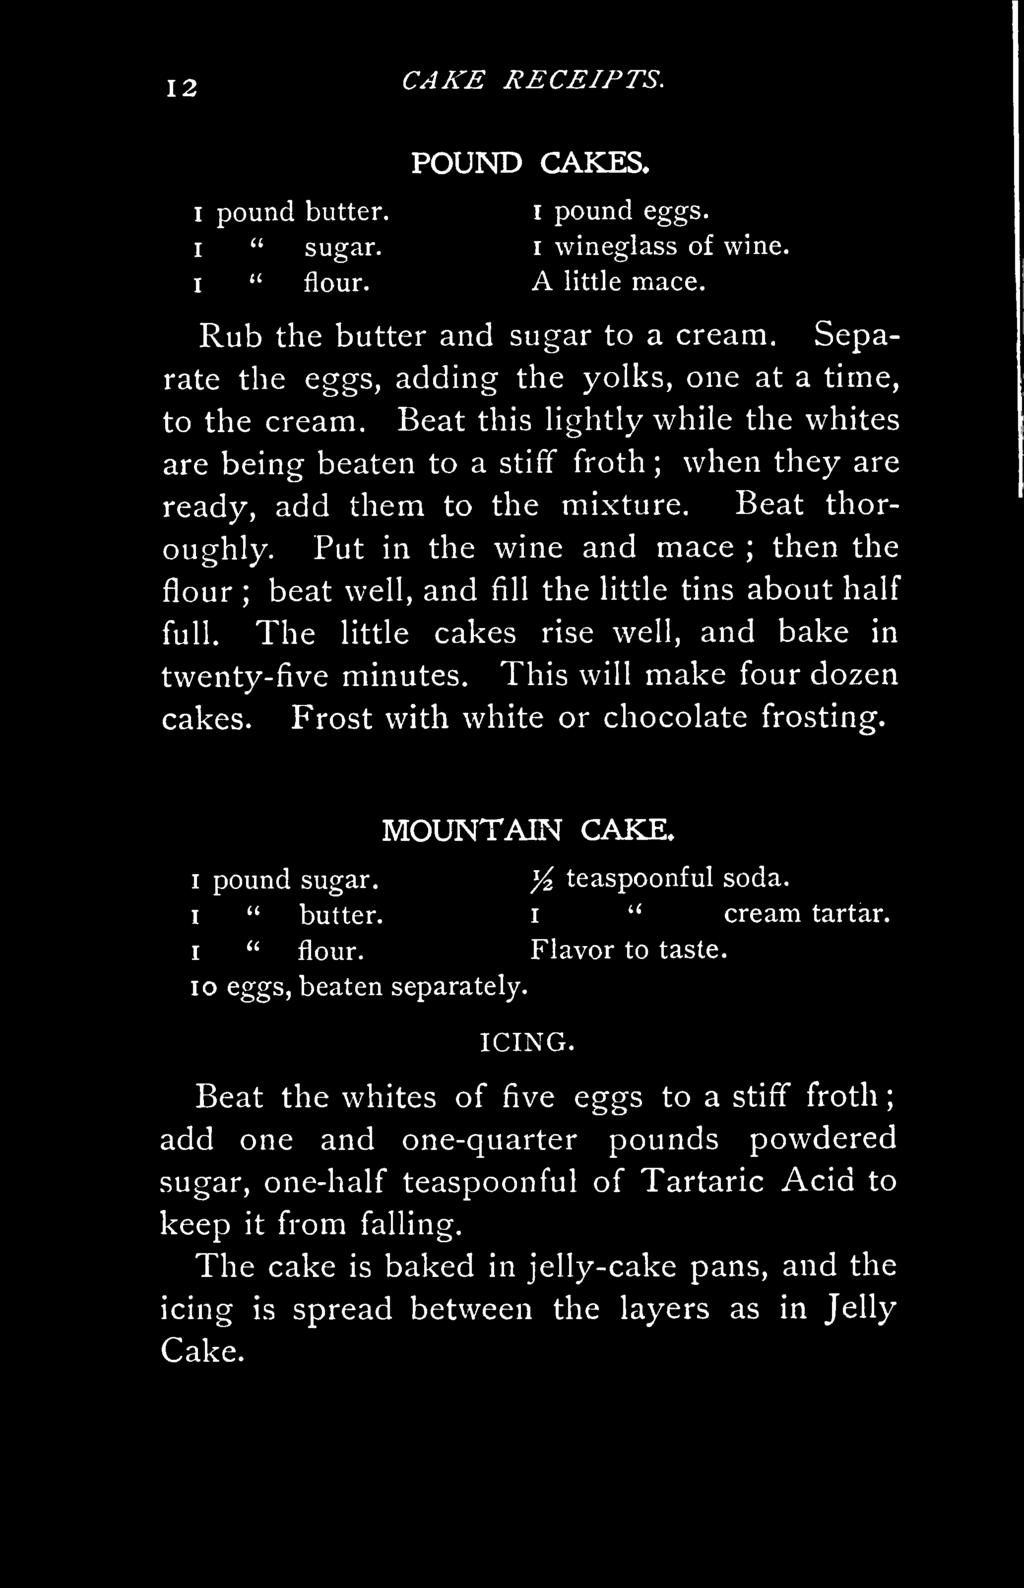 Put in the wine and mace ; then the flour ; beat well, and fill the little tins about half full. The little cakes rise well, and bake in twenty-five minutes. This will make four dozen cakes.